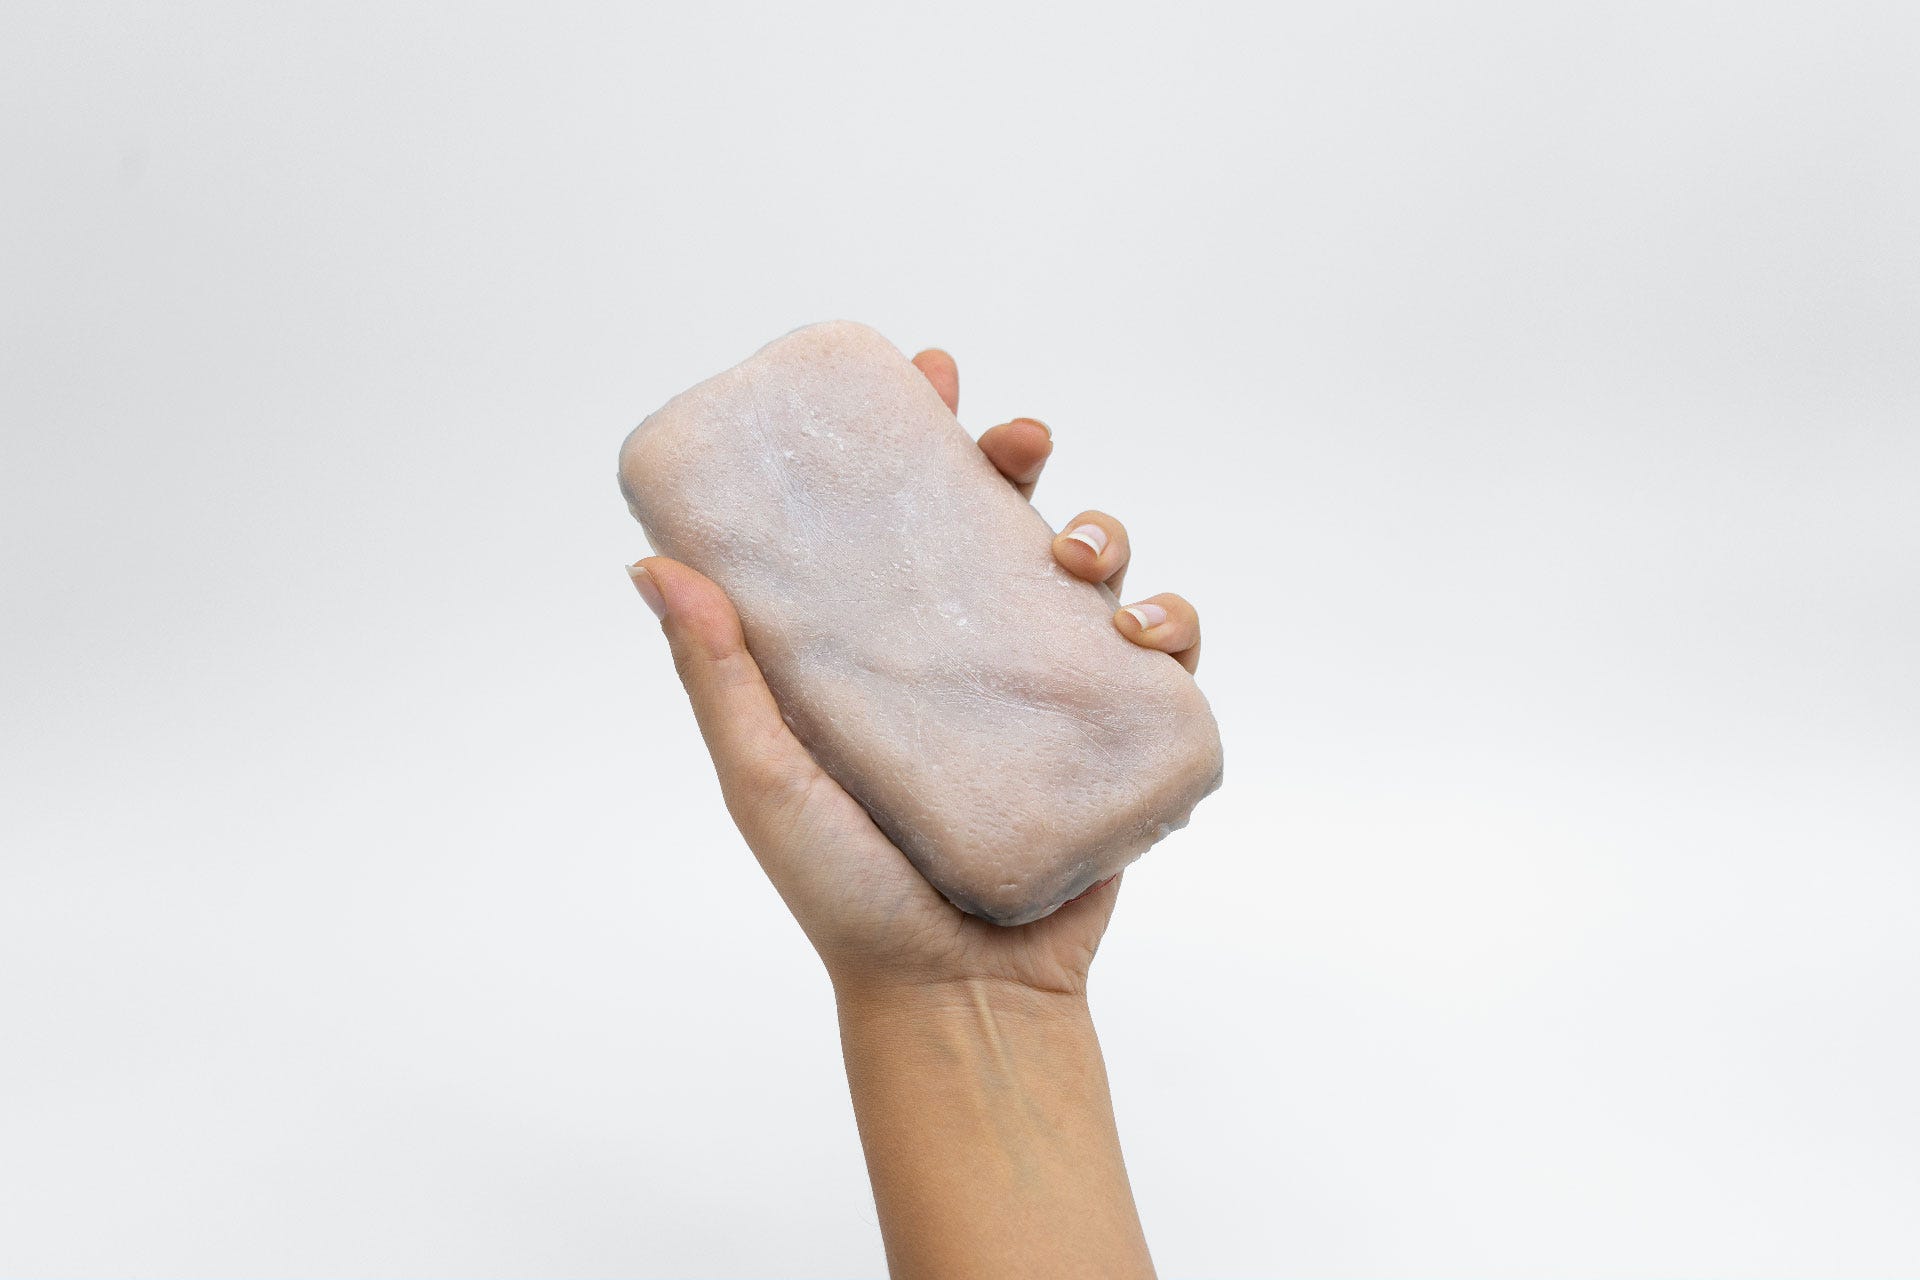 These Artificial Skin Phone Cases Are Part Of A Research